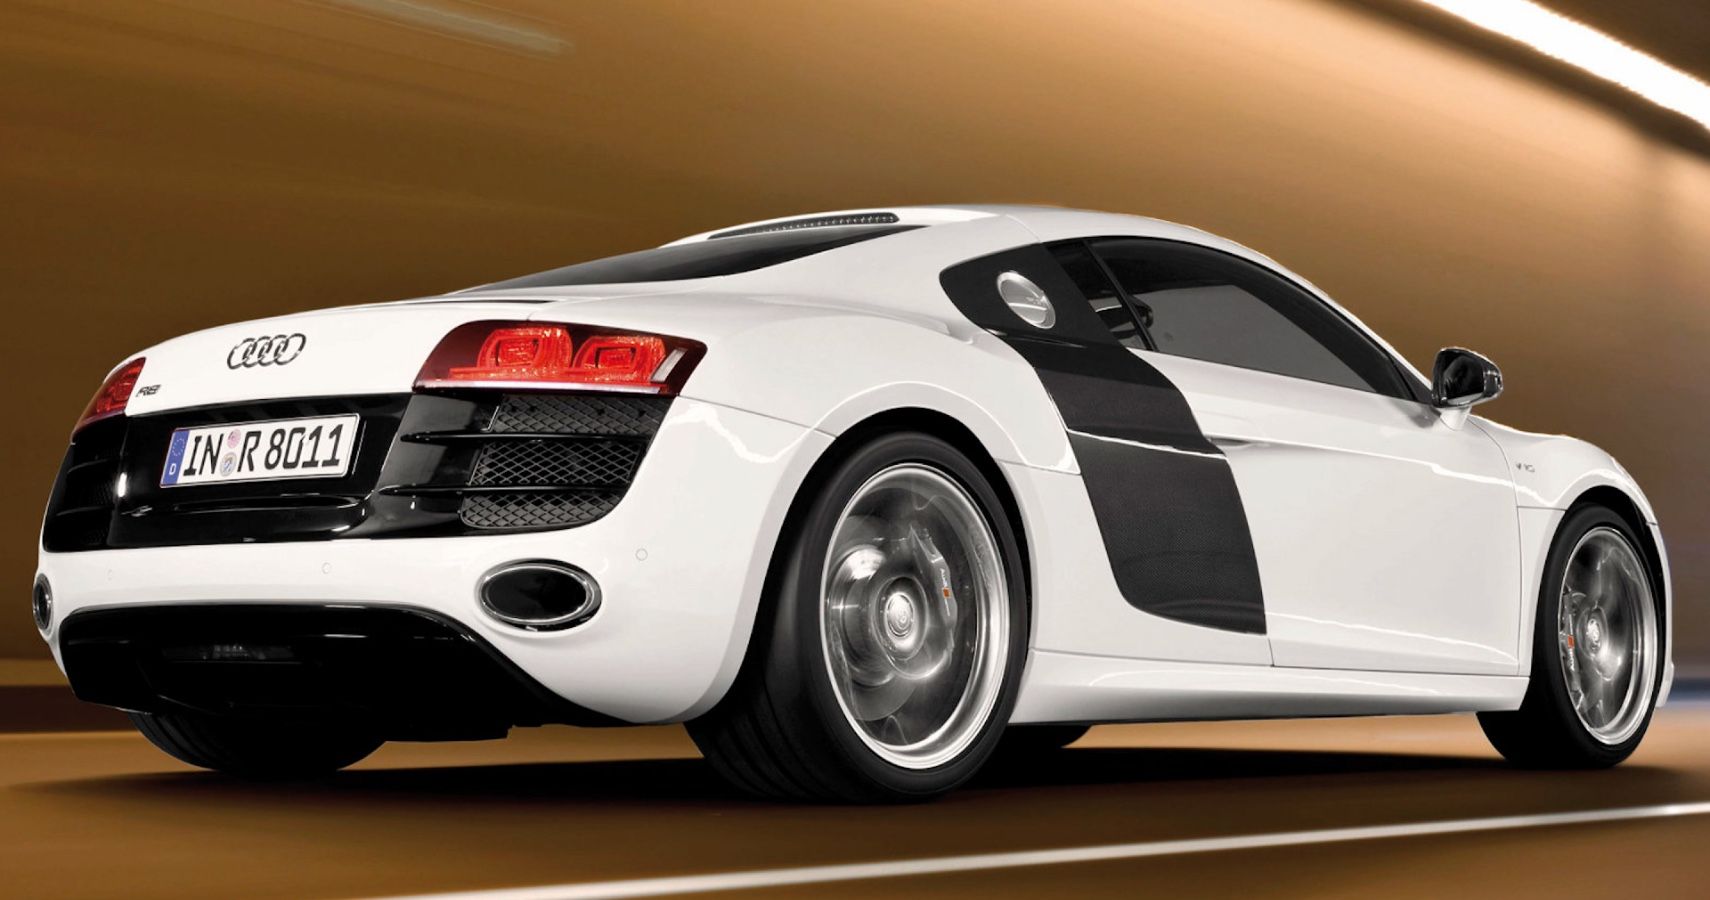 Why The First-Gen Audi R8 V10 Is An Awesome Supercar To Buy Under $100,000